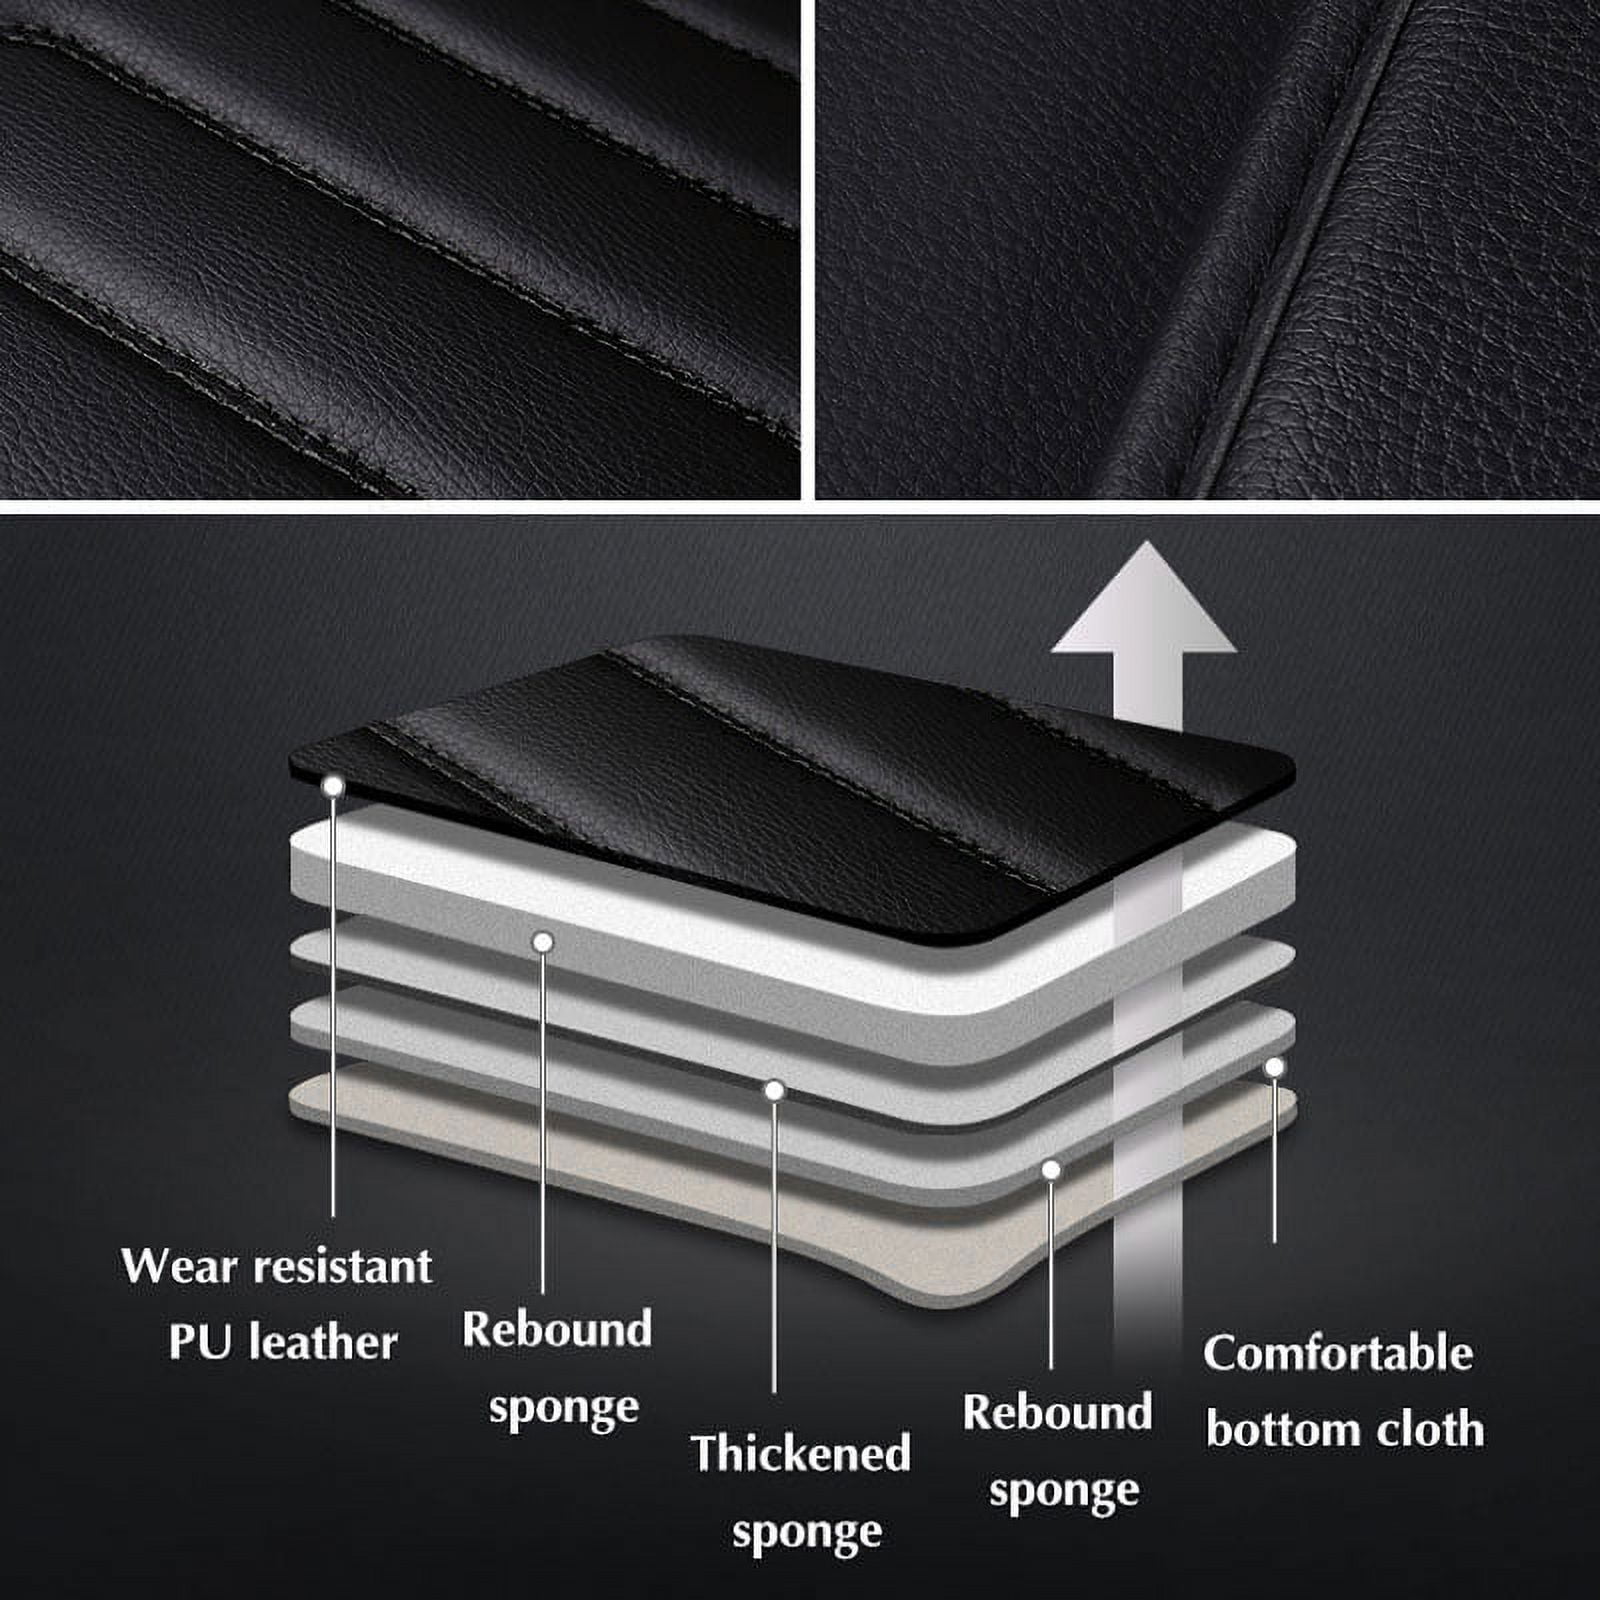 8sanlione Leather Car Seat Cover, Car Front Seat Cushion/Protector,  Breathable Comfort Automotive Seat Cover, Compatible with Most Cars,  Vehicles